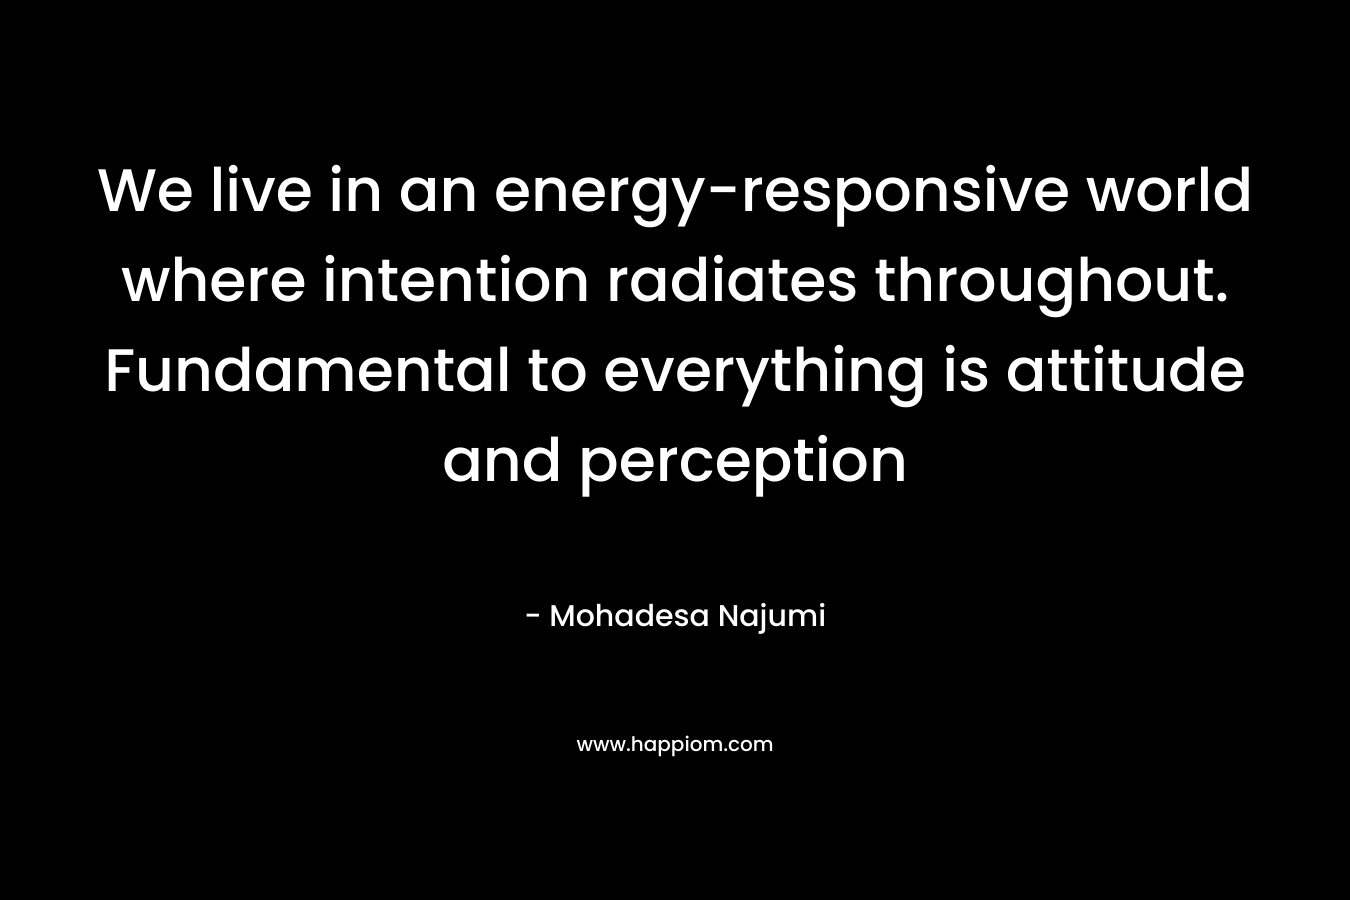 We live in an energy-responsive world where intention radiates throughout. Fundamental to everything is attitude and perception